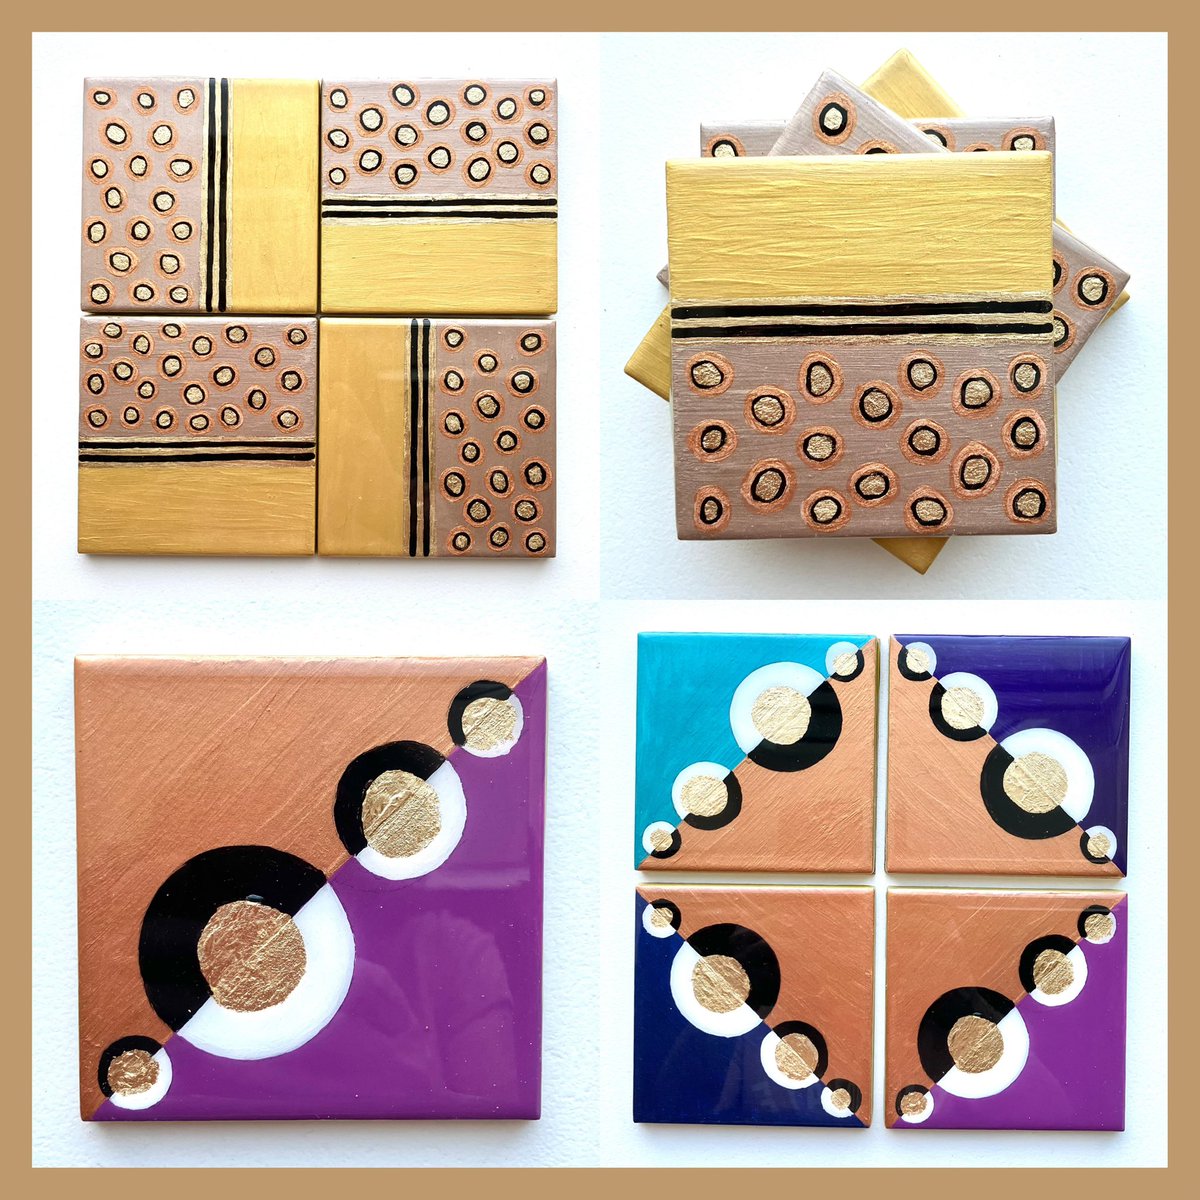 Excited to share these NEW hand painted coaster tiles, in a colourful retro design, with a resin top coat: muresindesigns.etsy.com #EarlyBiz #elevenseshour #craftbizparty #etsygifts #handpainted #resin #coasters